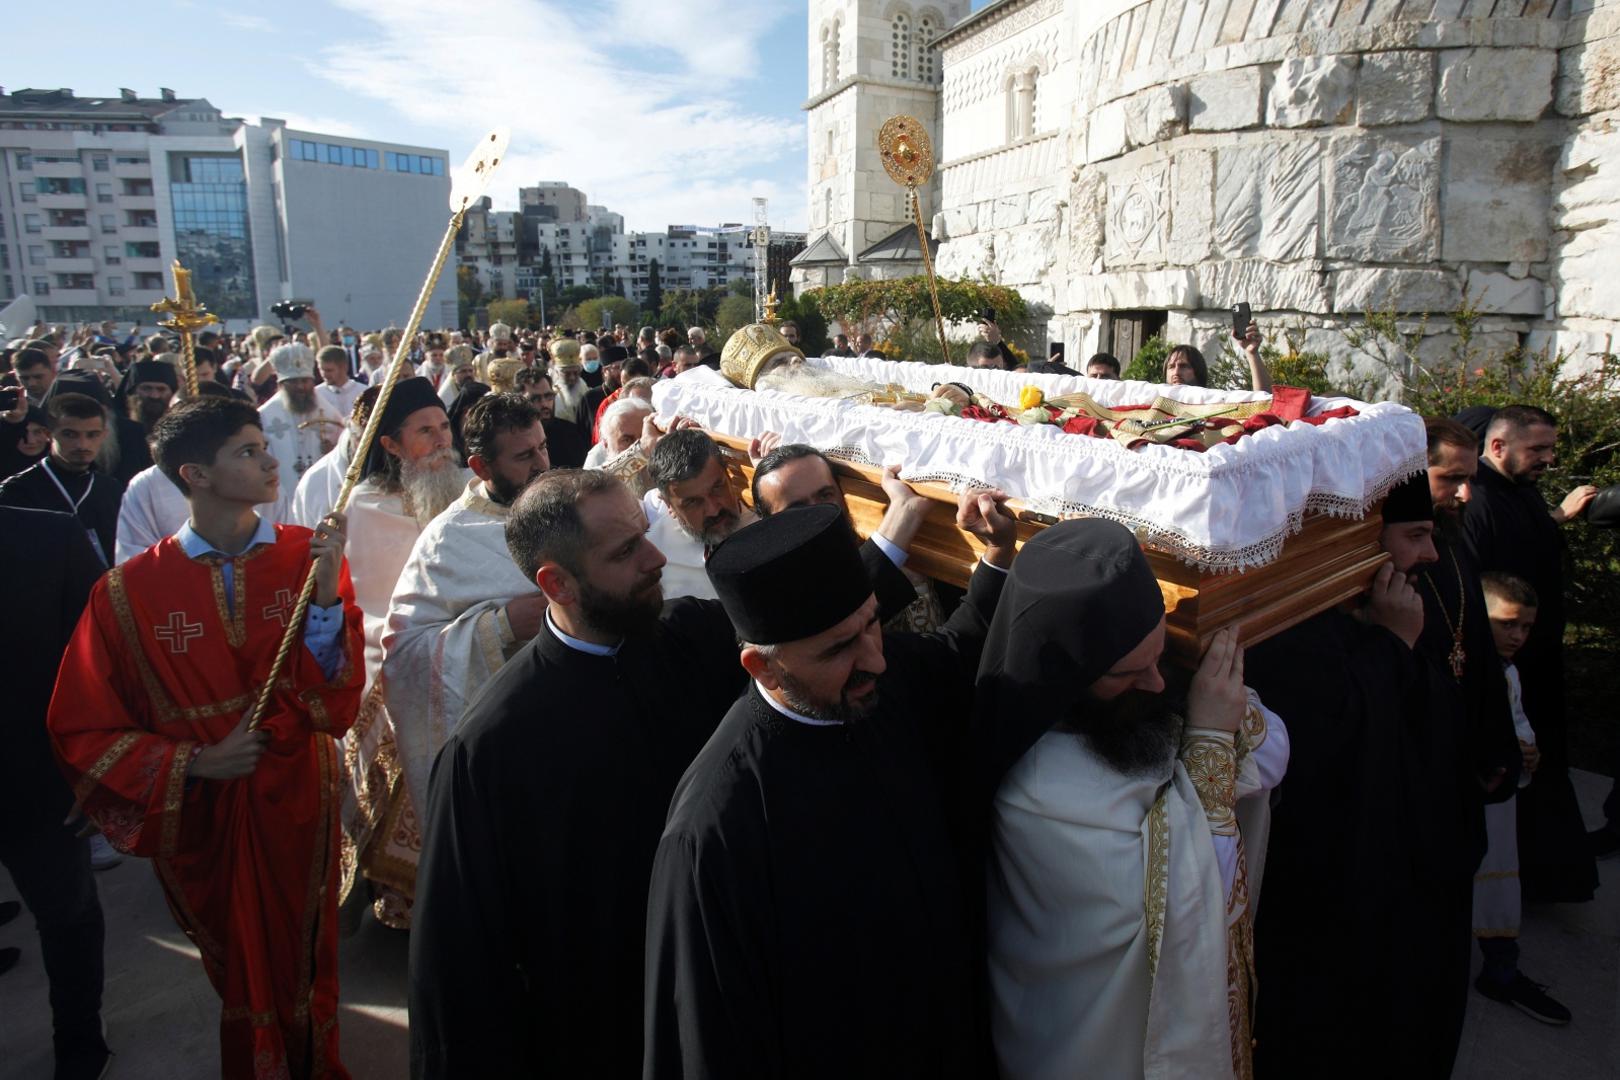 Priests carry the coffin of Metropolitan Amfilohije Radovic in Podgorica Priests carry the coffin of Metropolitan Amfilohije Radovic, the top cleric of the Serbian Orthodox Church in Montenegro who died from the coronavirus disease (COVID-19), around Cathedrall of Christ Ressurection during his funeral in Podgorica, Montenegro, November 1, 2020. REUTERS/Stevo Vasiljevic STEVO VASILJEVIC